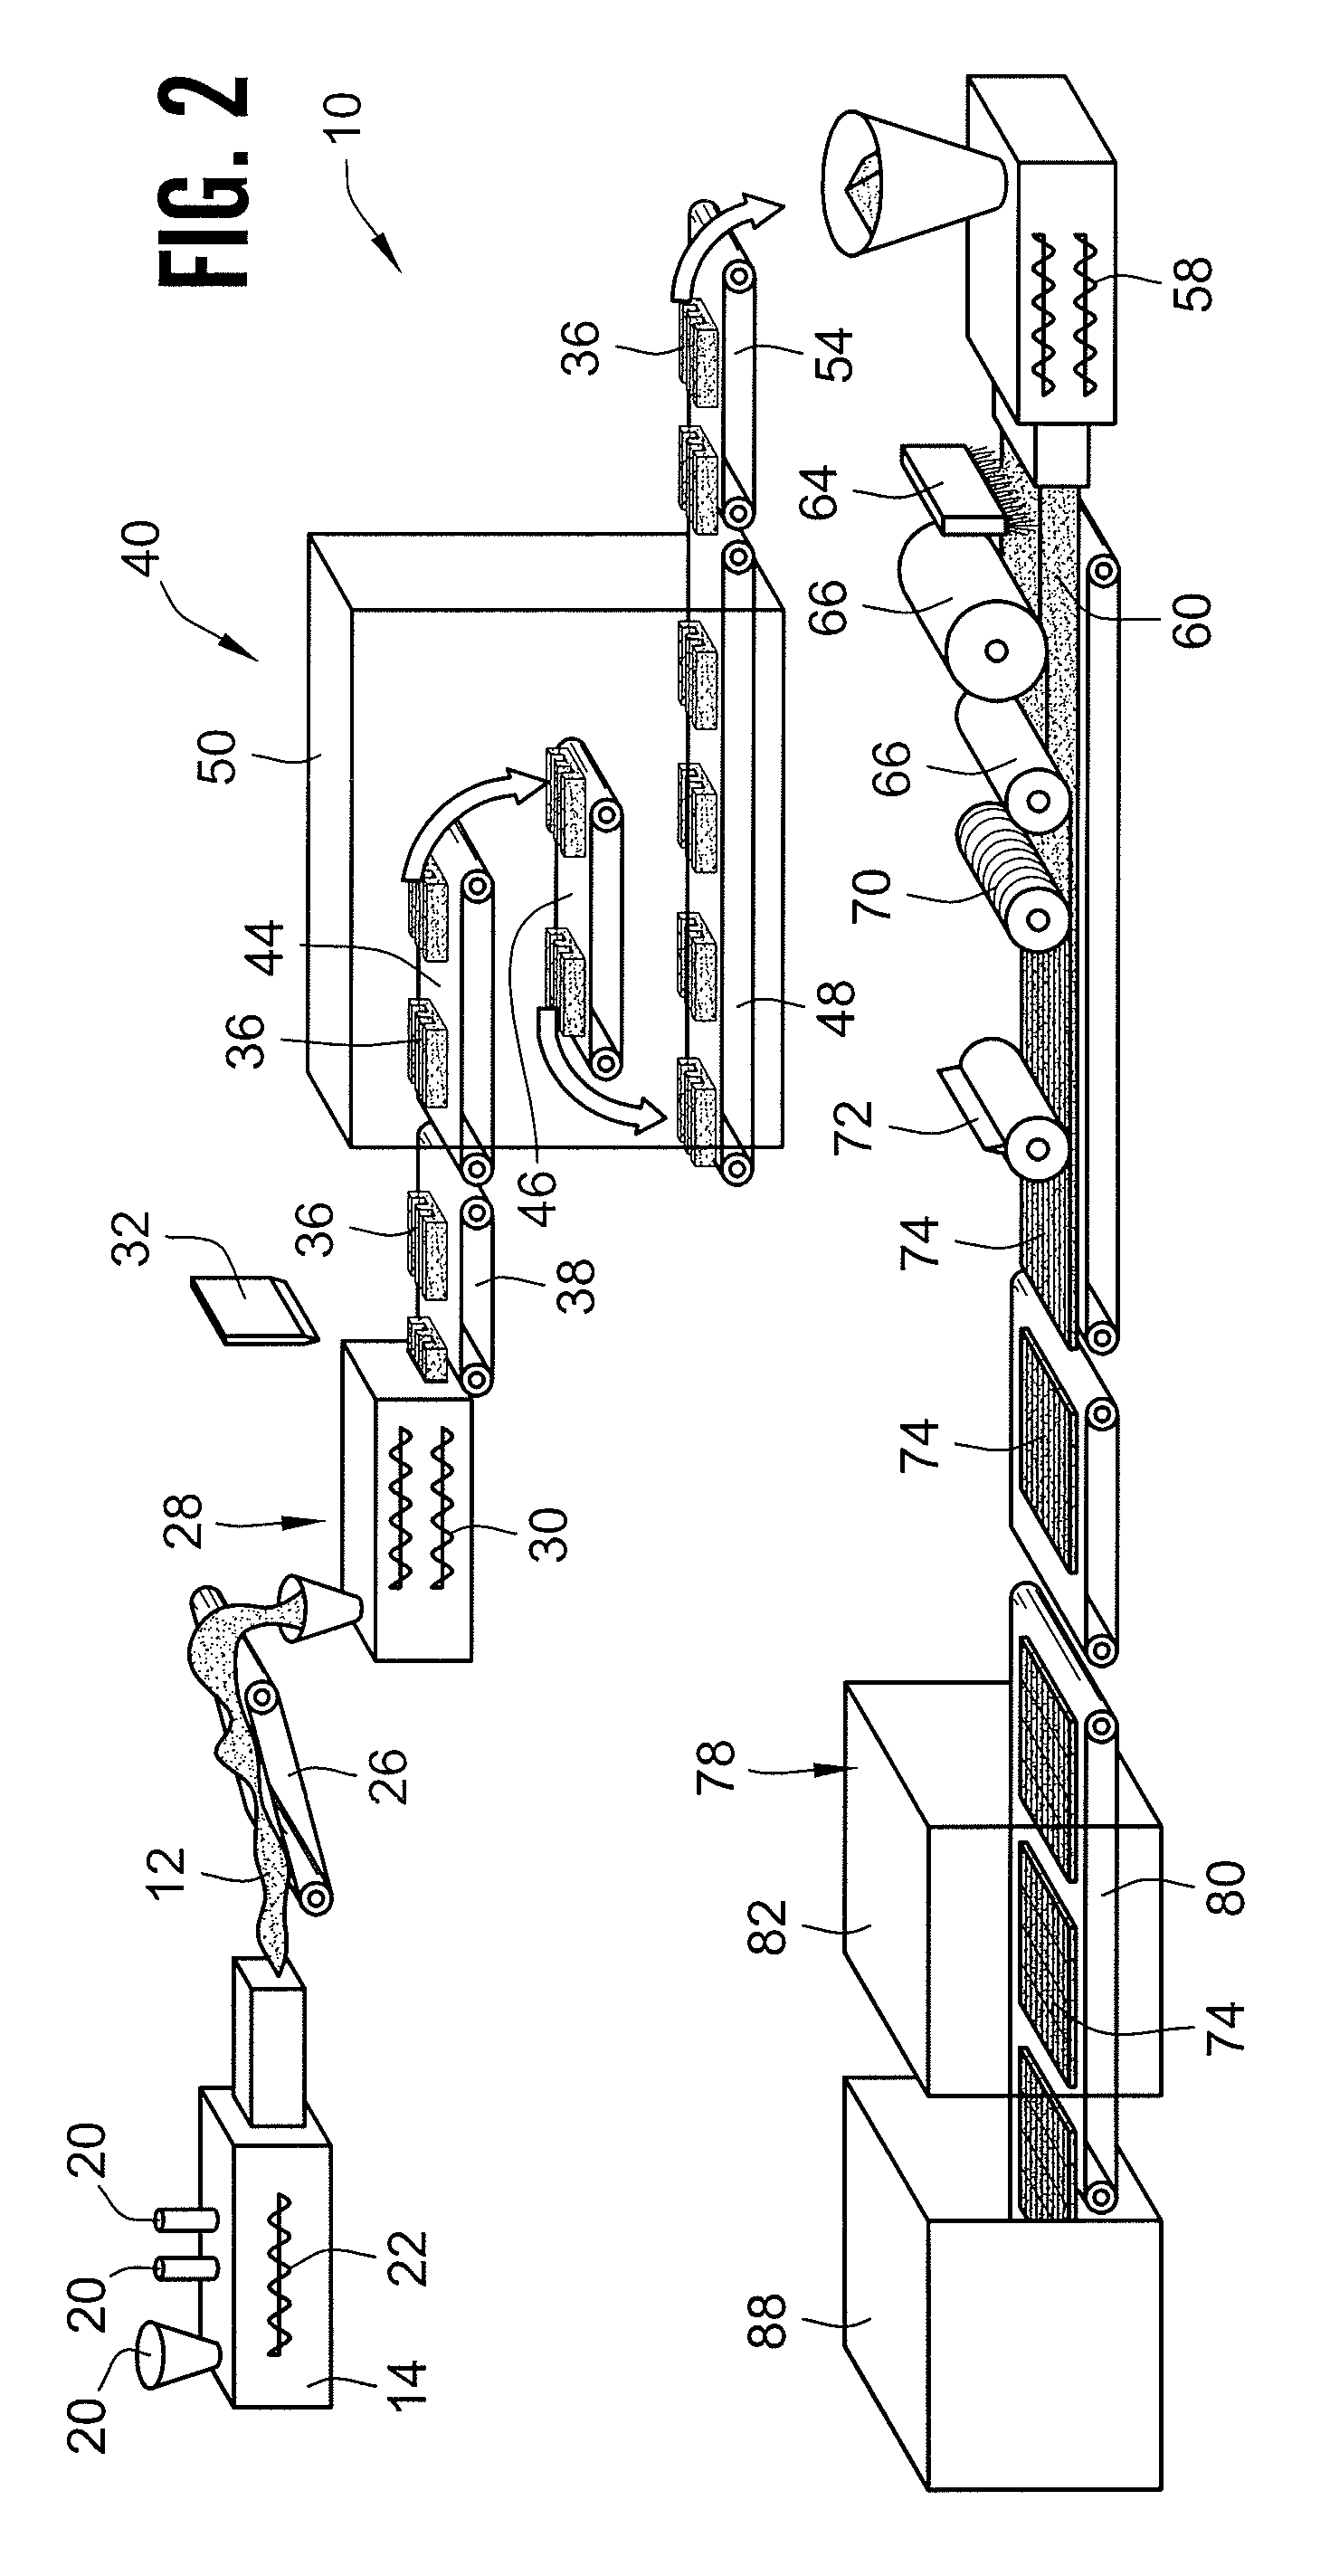 Gum Manufacturing System with Loafing and Conditioning Features